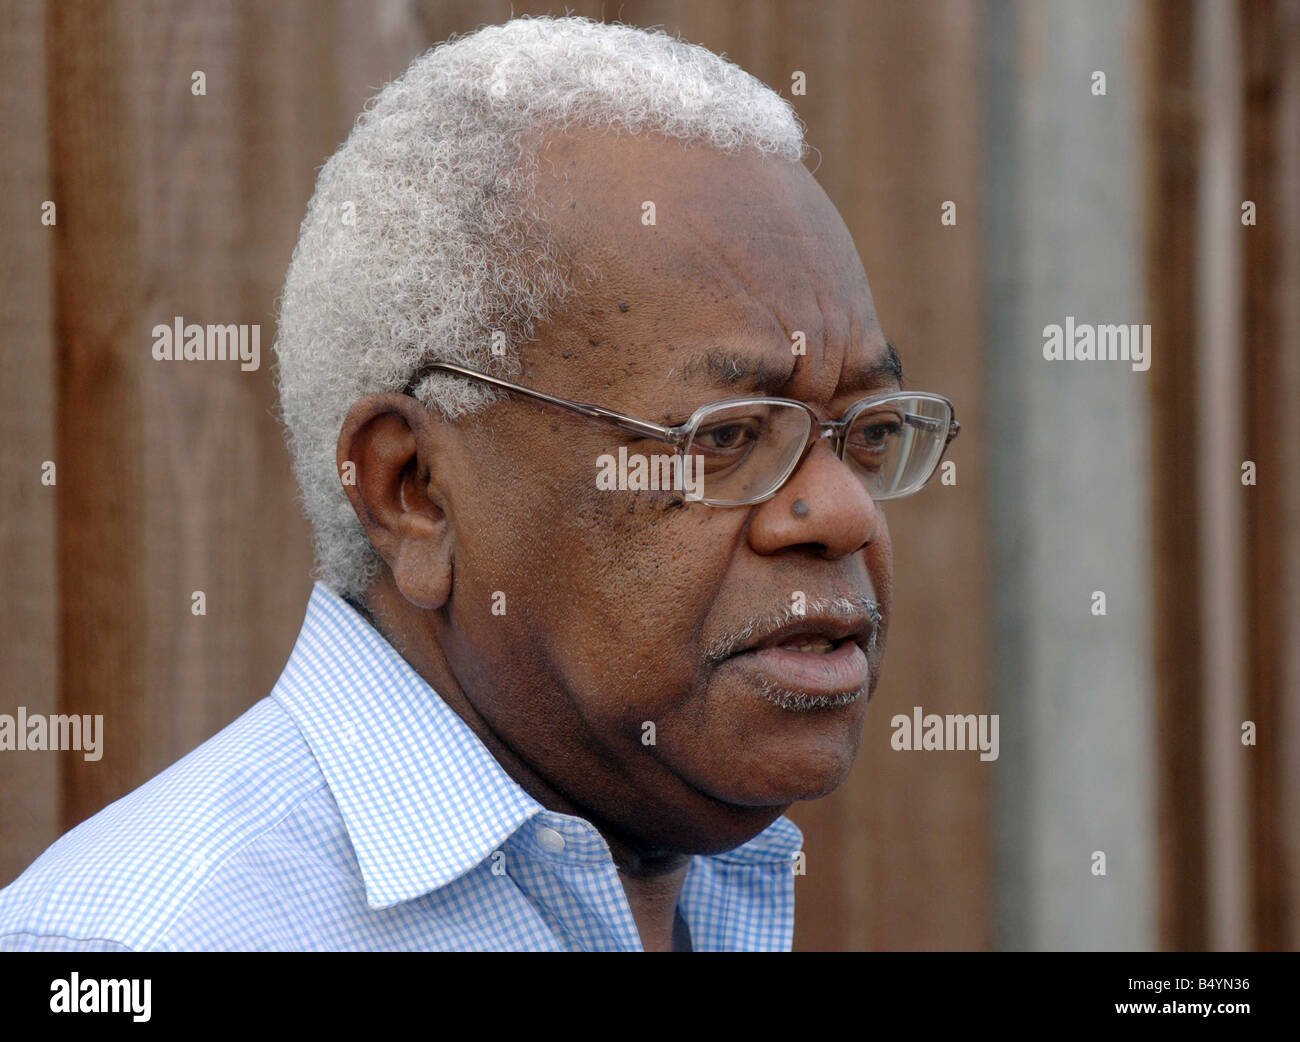 Save preview image - sir-trevor-mcdonald-pictured-near-his-home-in-east-sheen-south-west-B4YN36